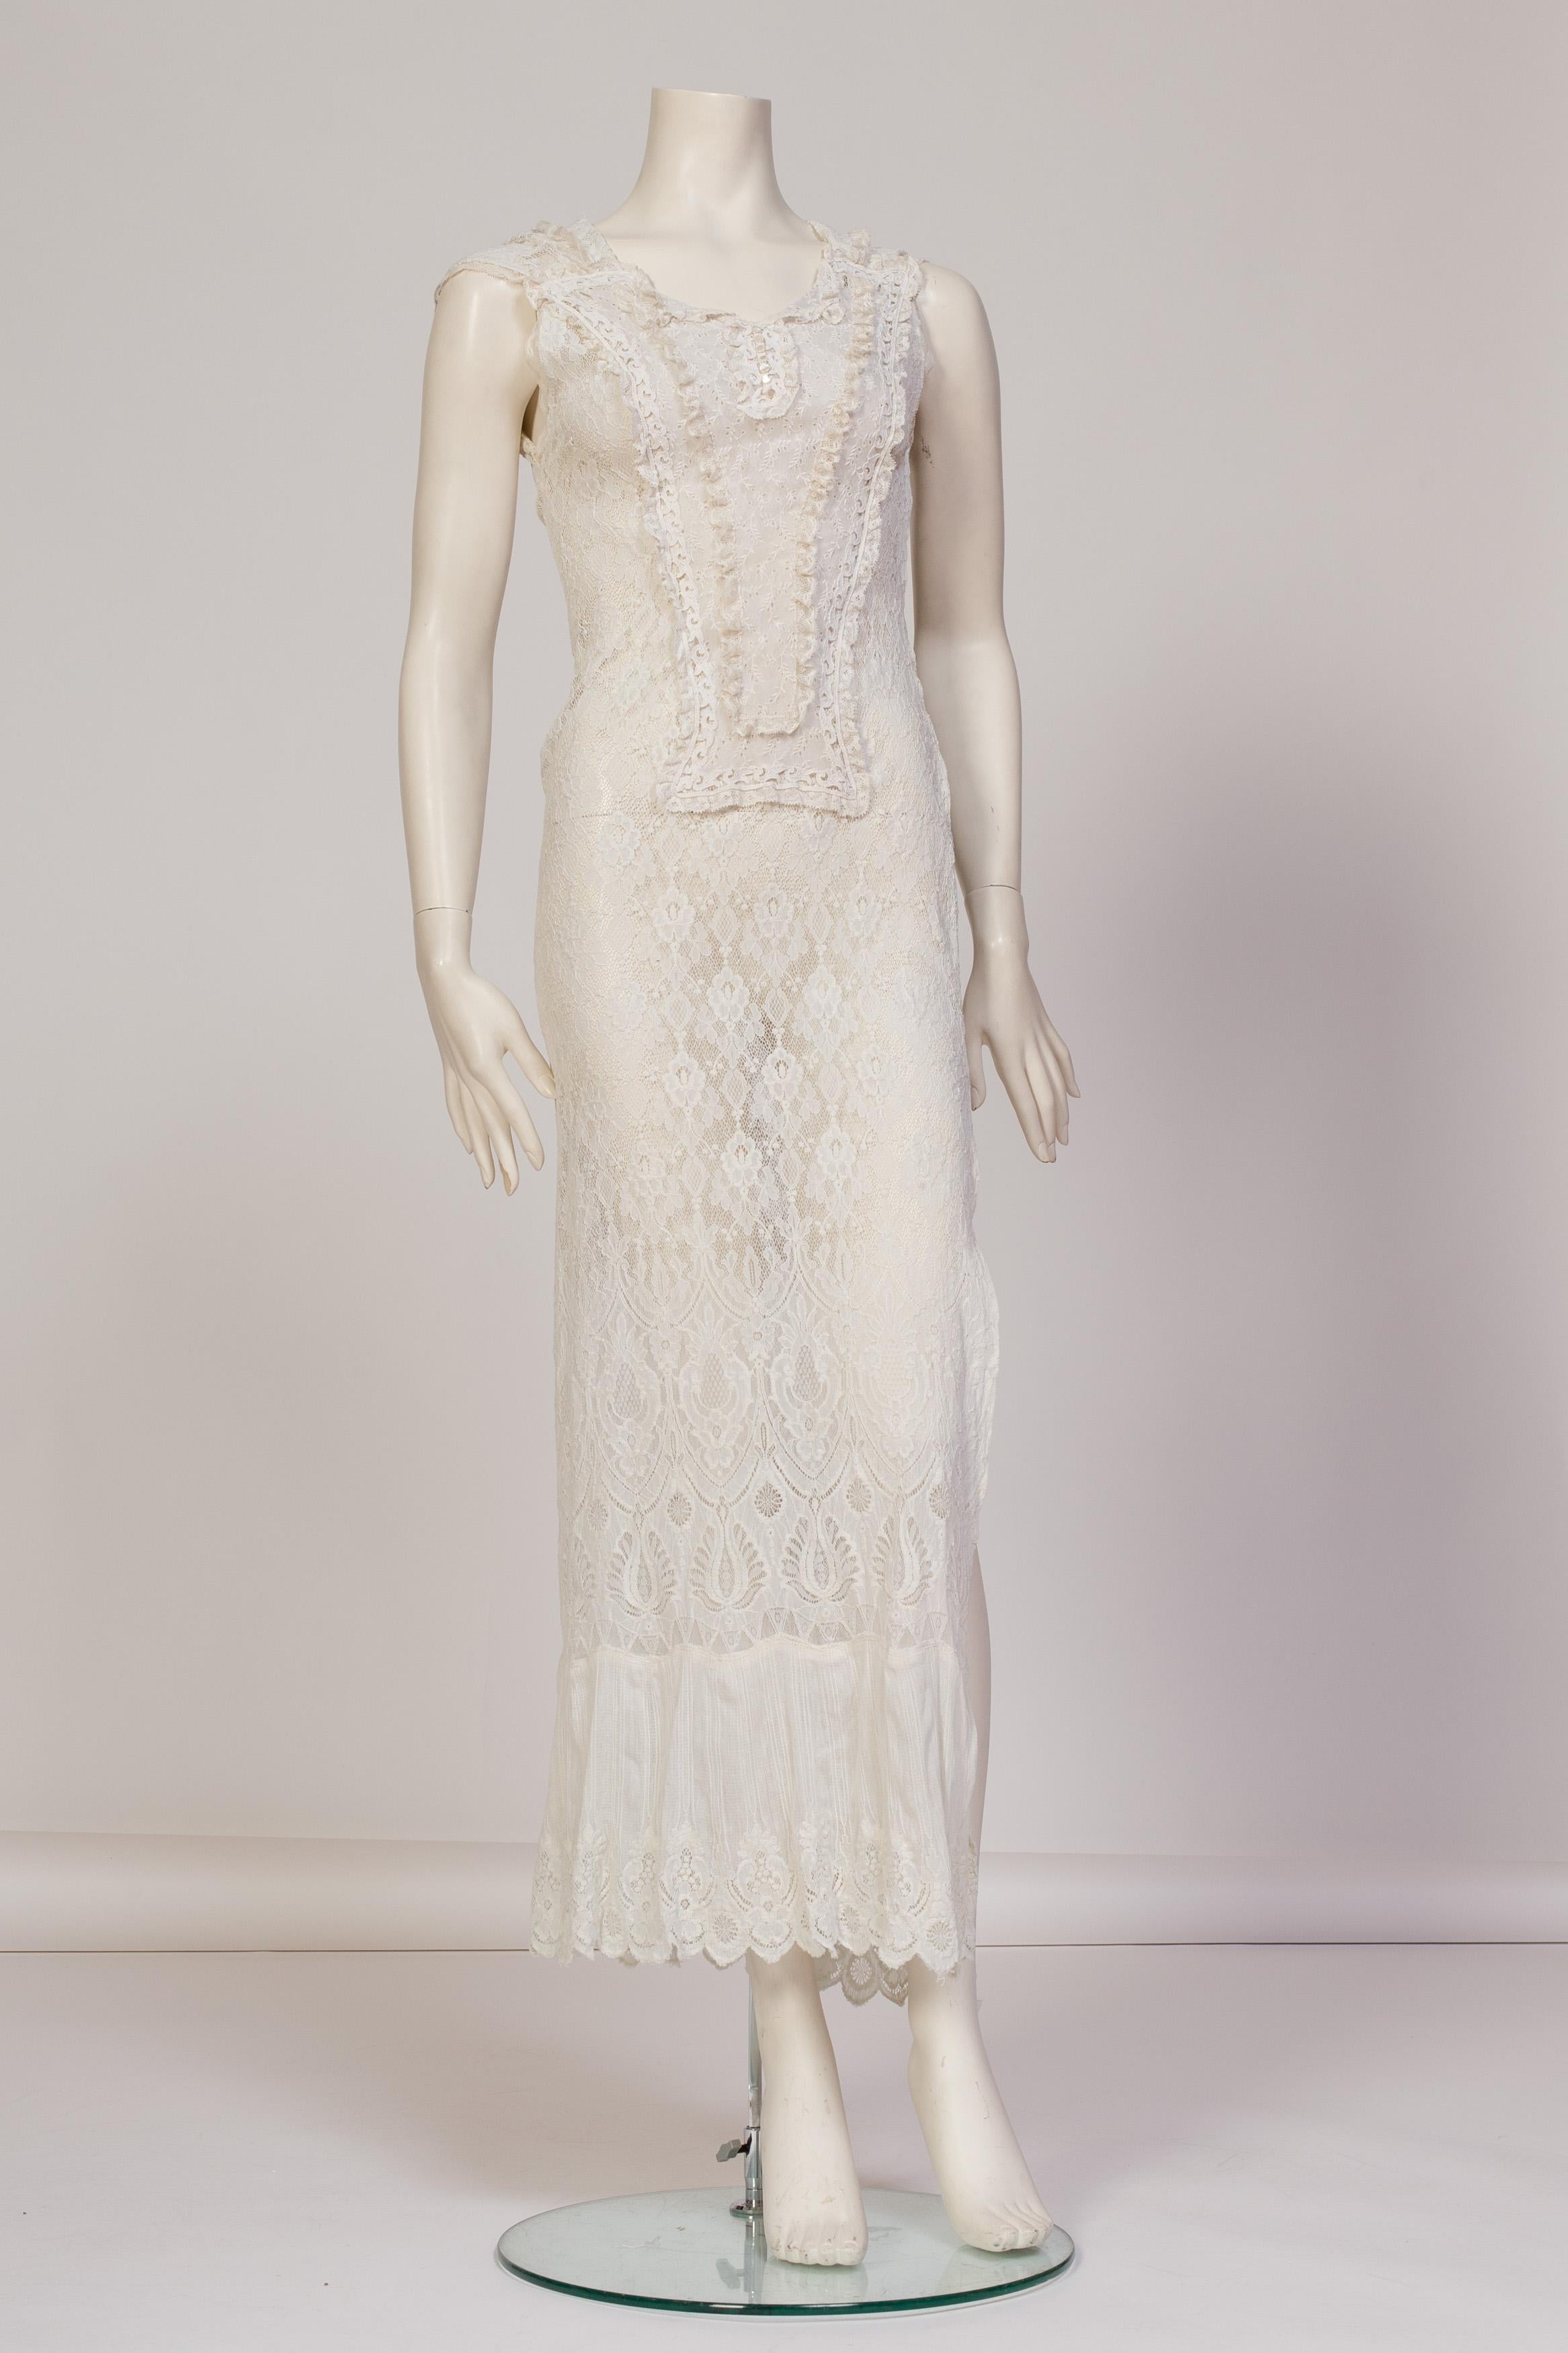 MORPHEW COLLECTION White Maxi Resort Dress Made From Edwardian & 1930'S Lace
MORPHEW COLLECTION is made entirely by hand in our NYC Ateliér of rare antique materials sourced from around the globe. Our sustainable vintage materials represent over a